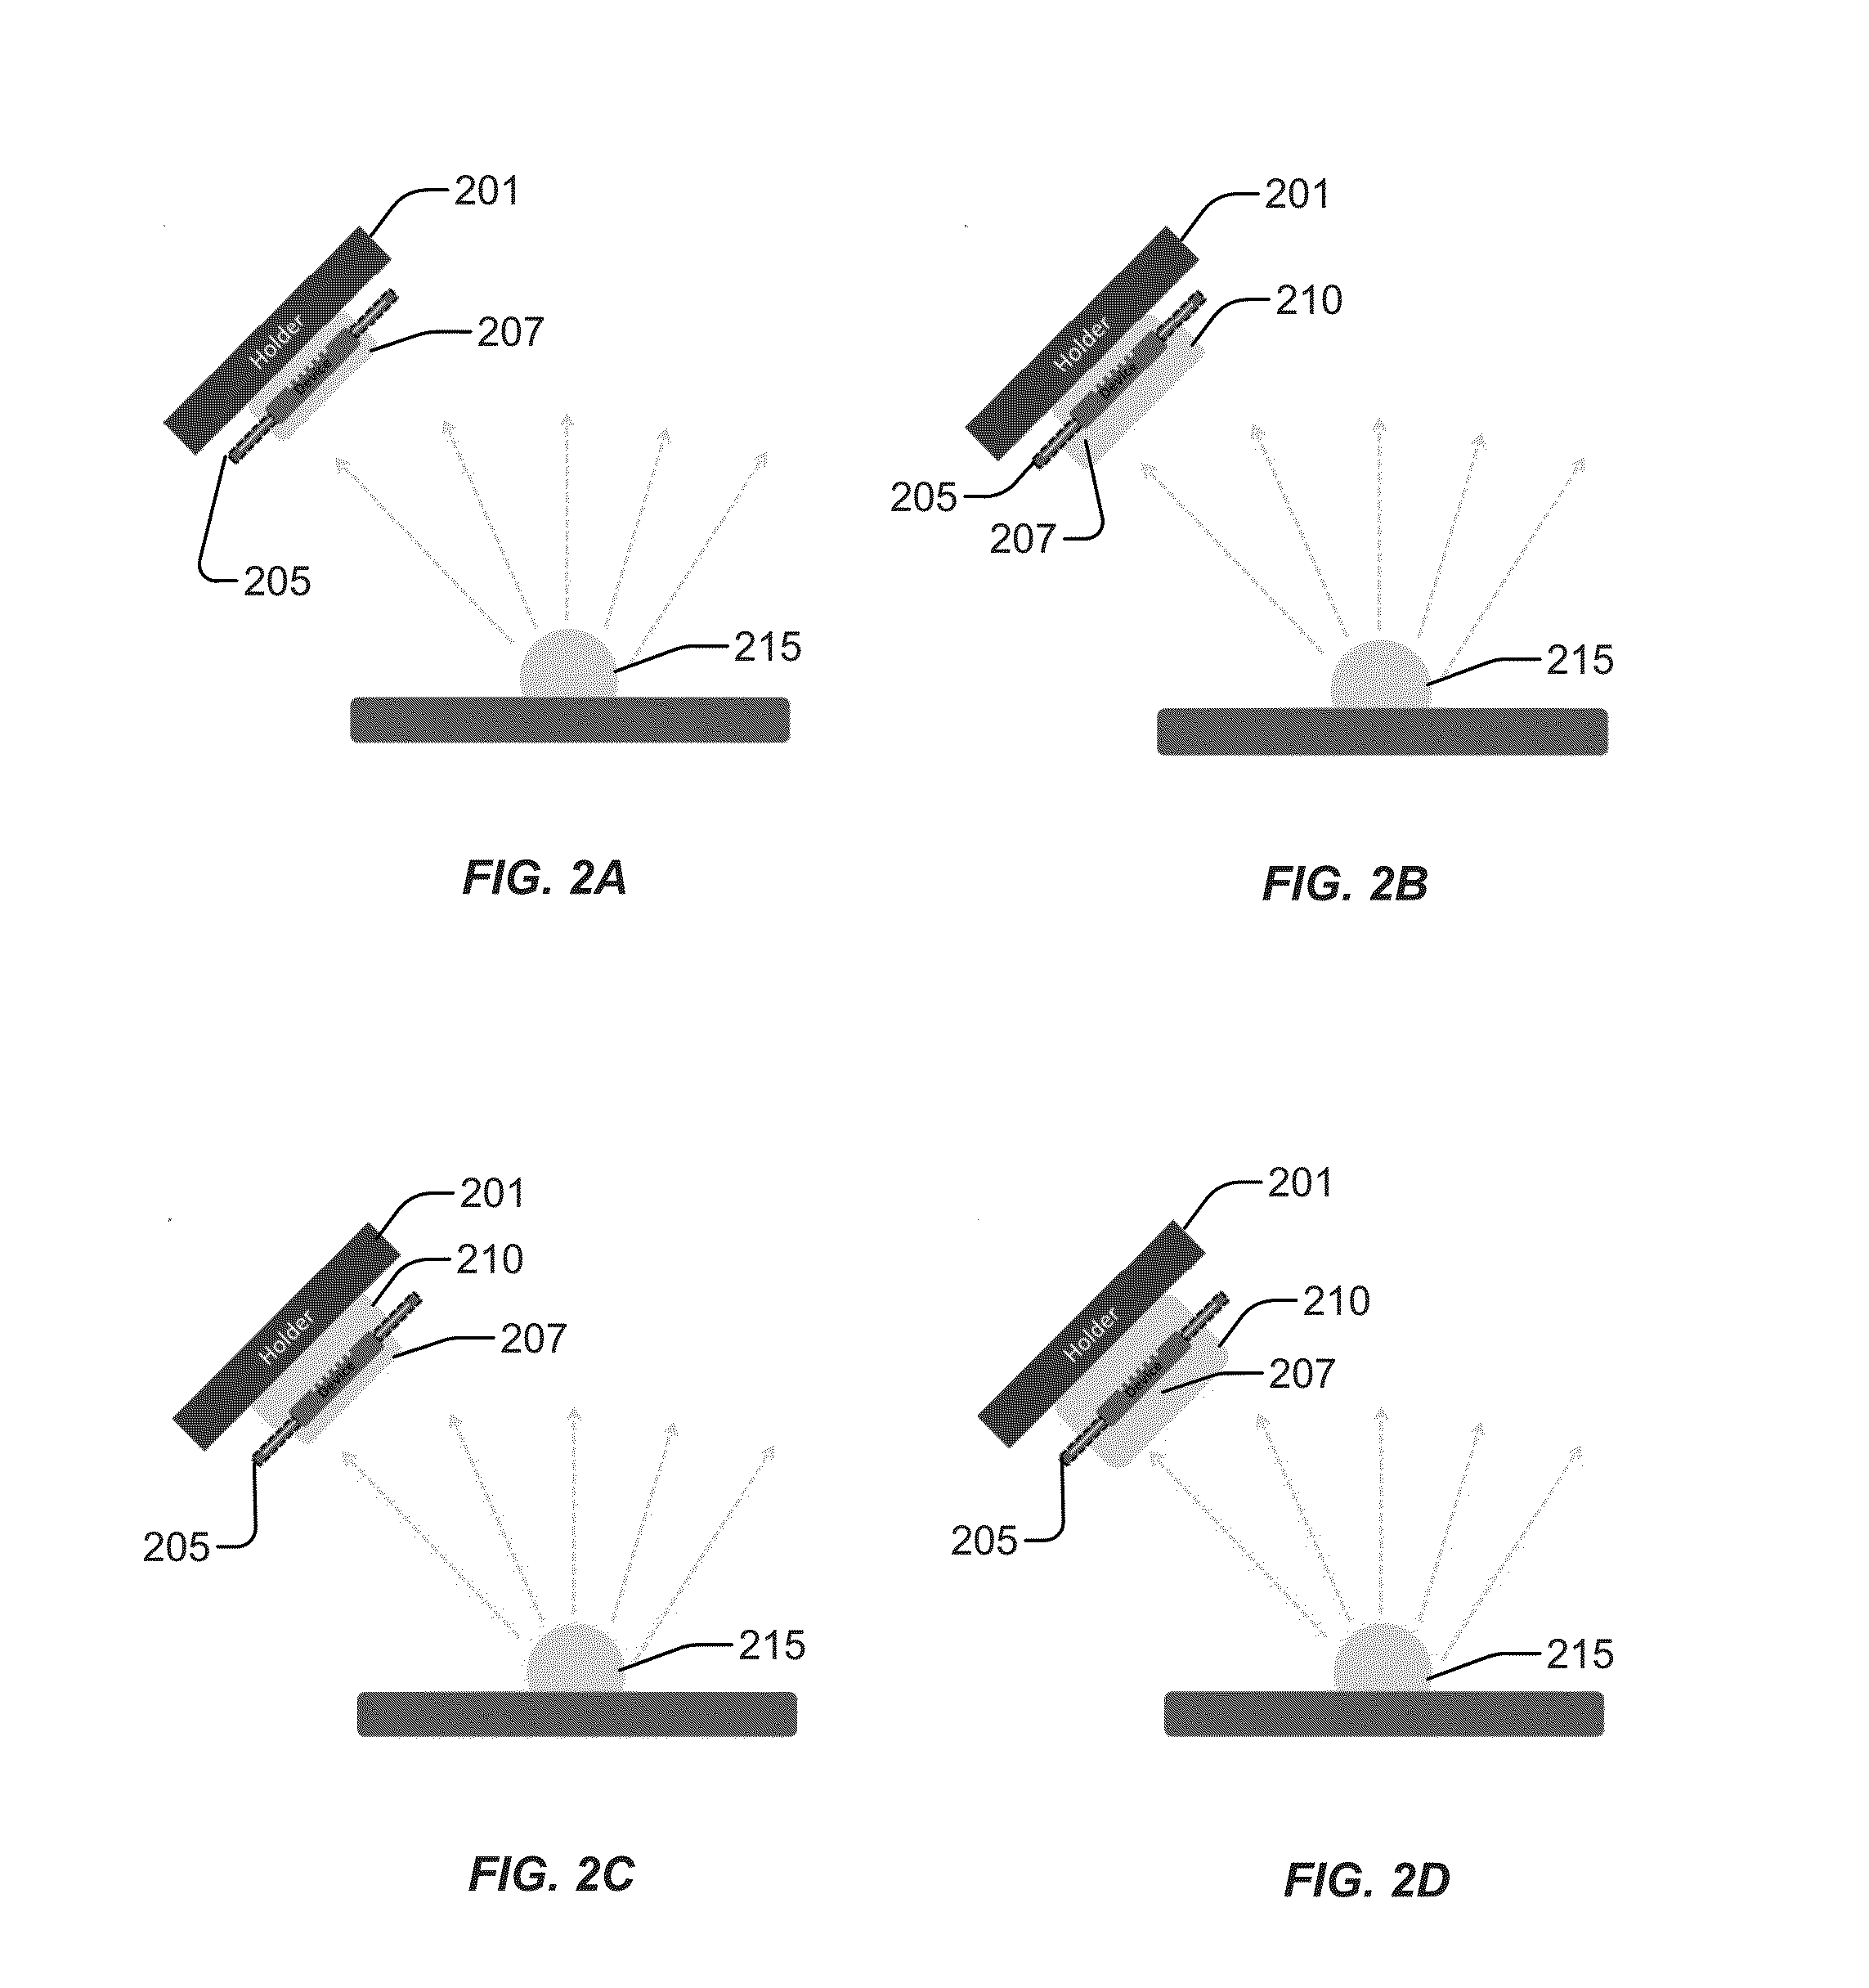 Multi-layer packaging scheme for implant electronics